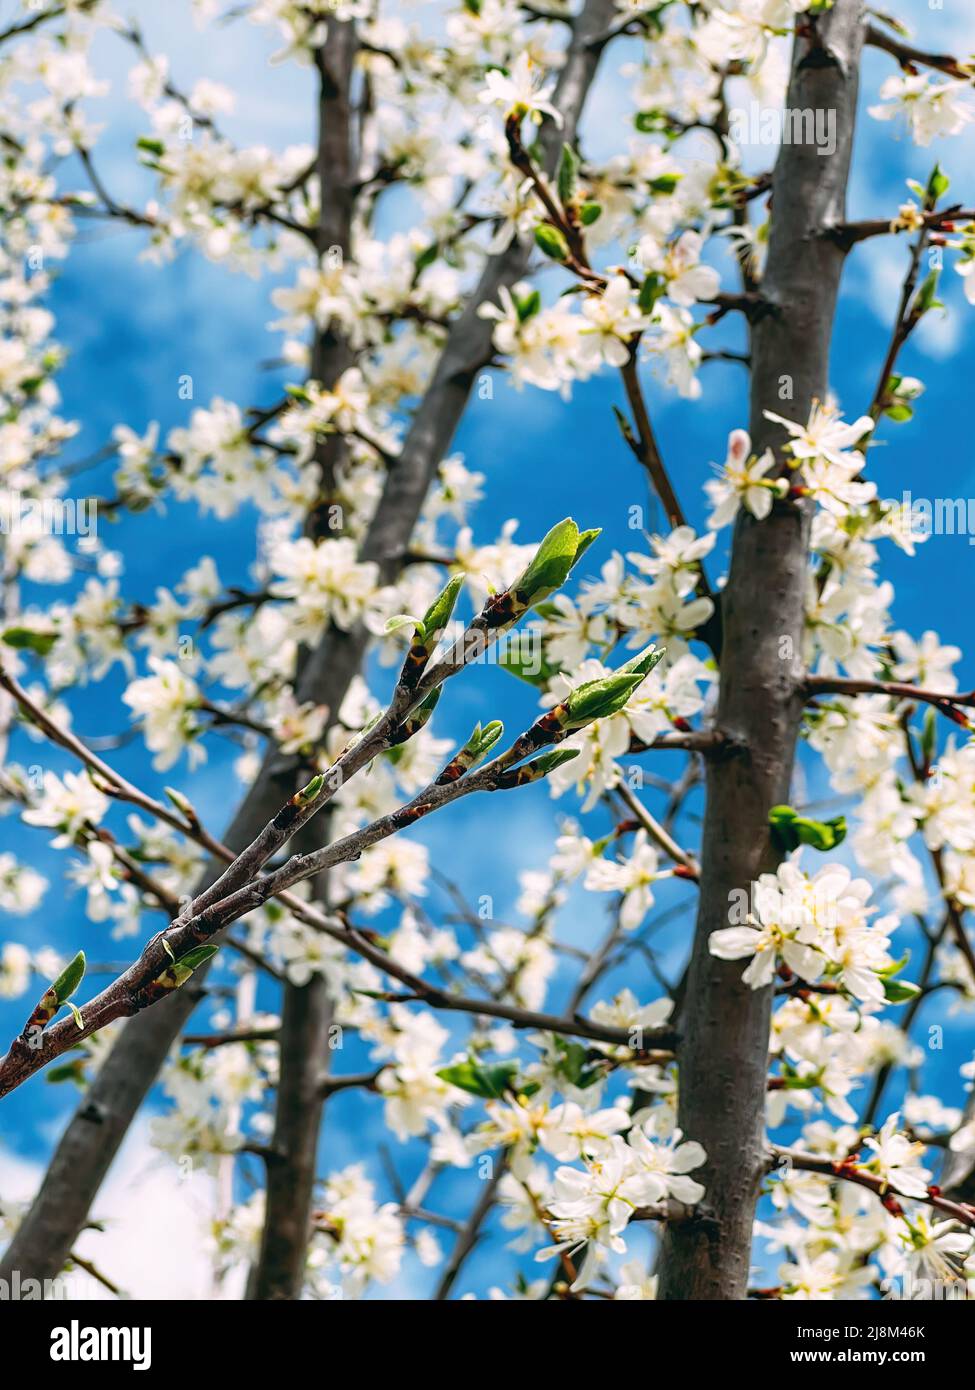 Blooming morus alba or white mulberry tree branches in orchard against blue sky, close up Stock Photo